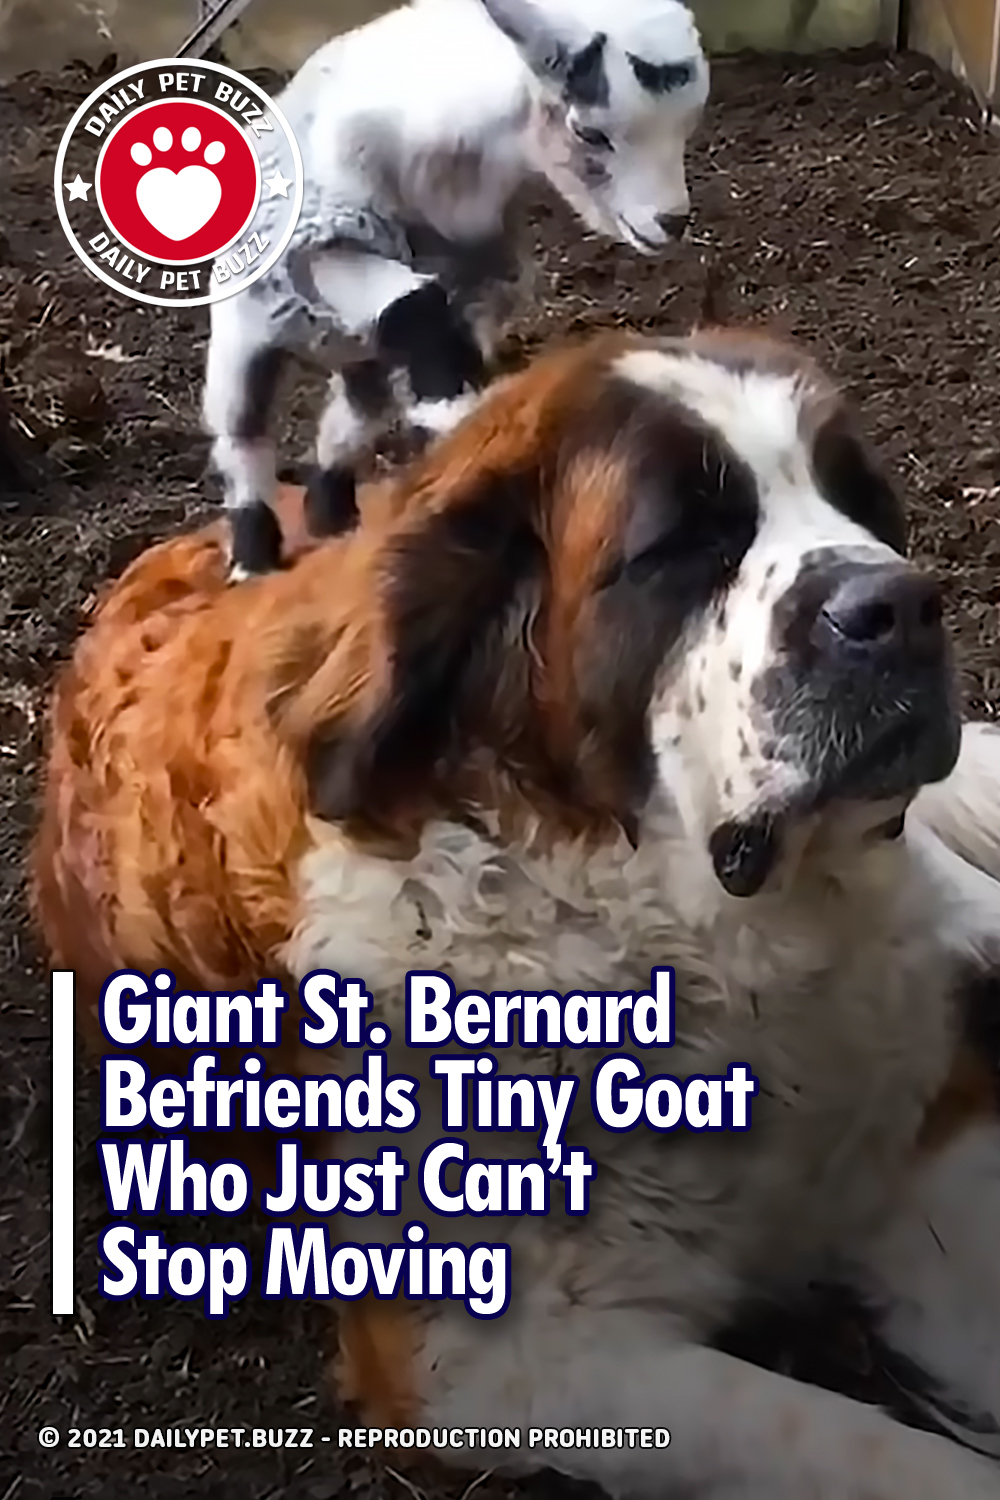 Giant St. Bernard Befriends Tiny Goat Who Just Can’t Stop Moving